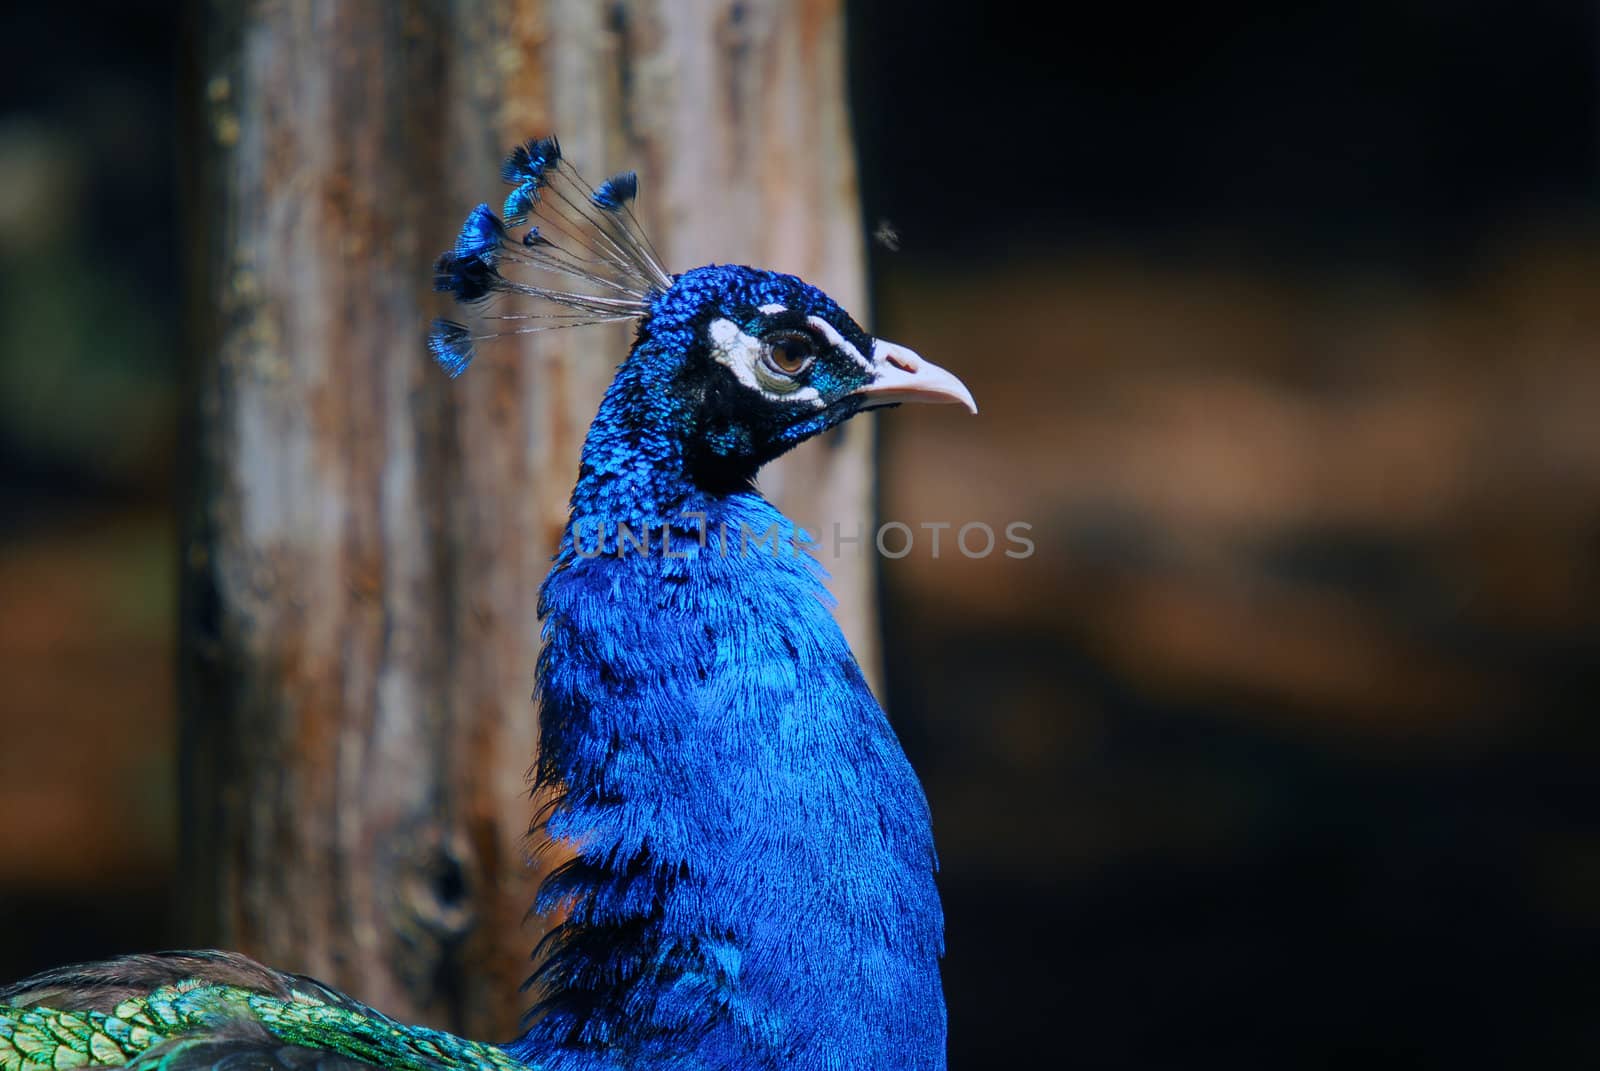 Closeup picture of a very colorful Indian Peafowl